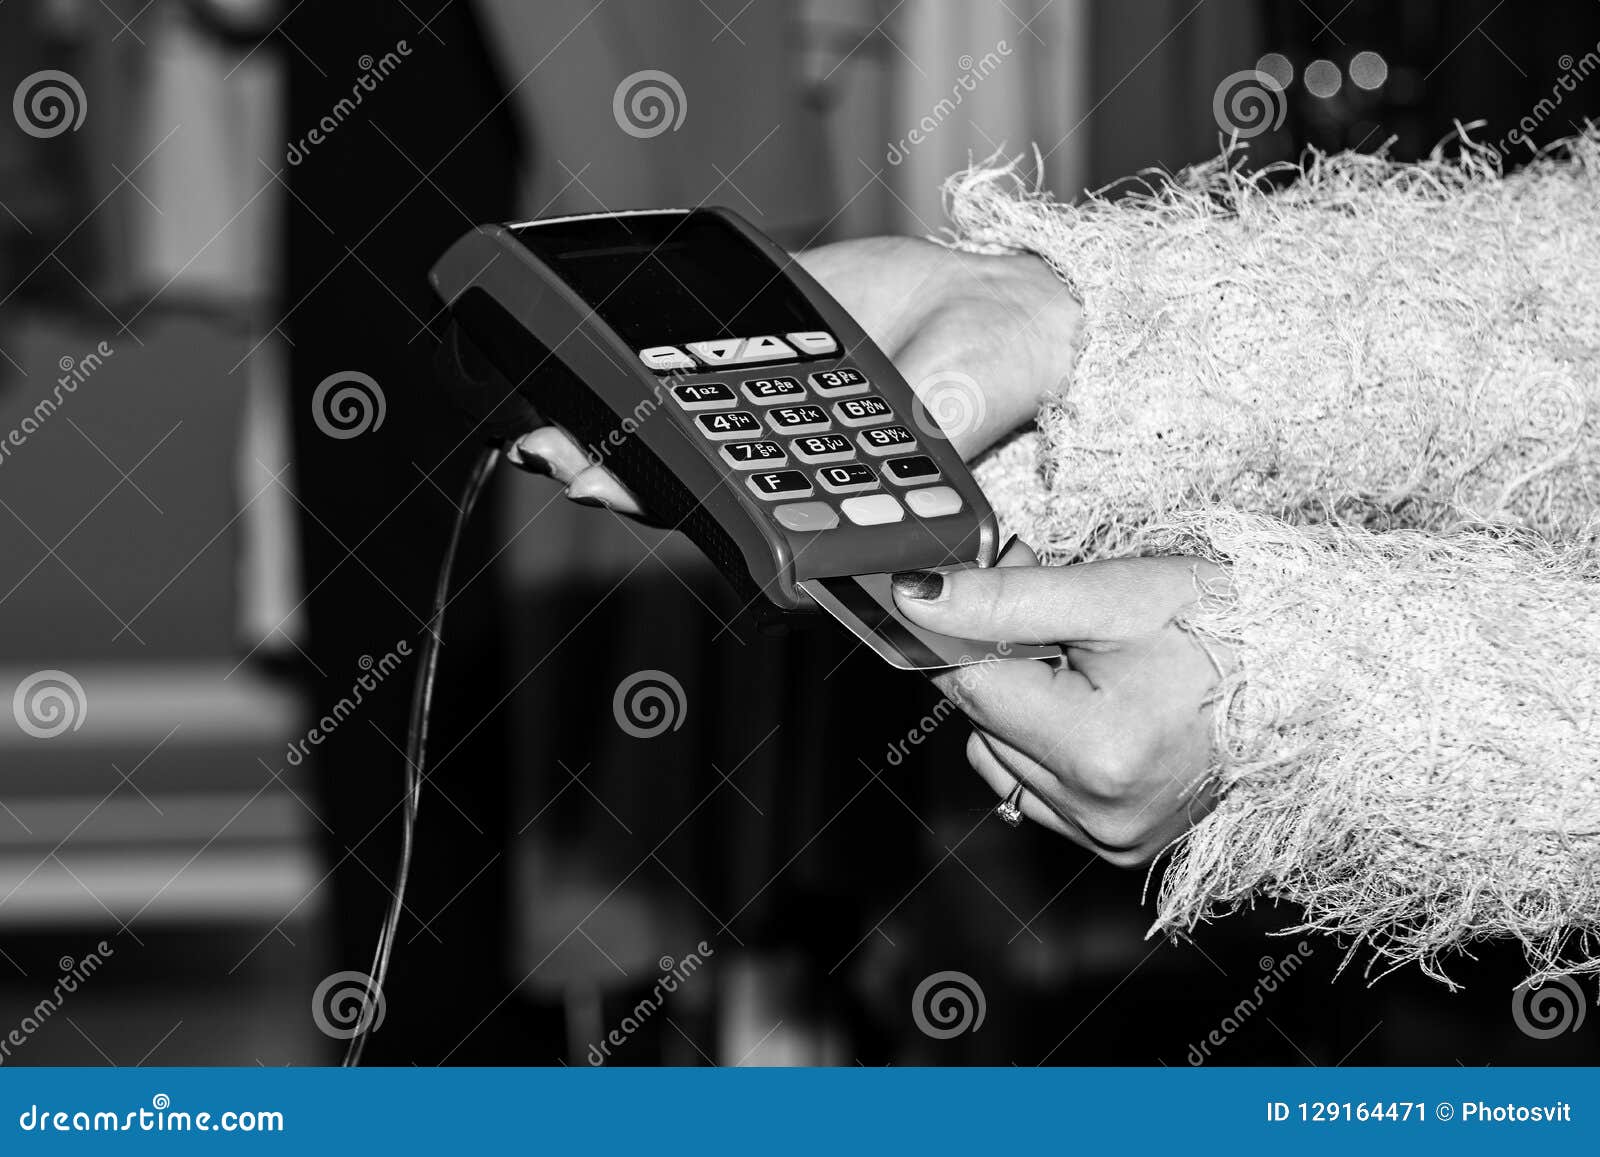 female hand puts bankcard into reader on defocused background